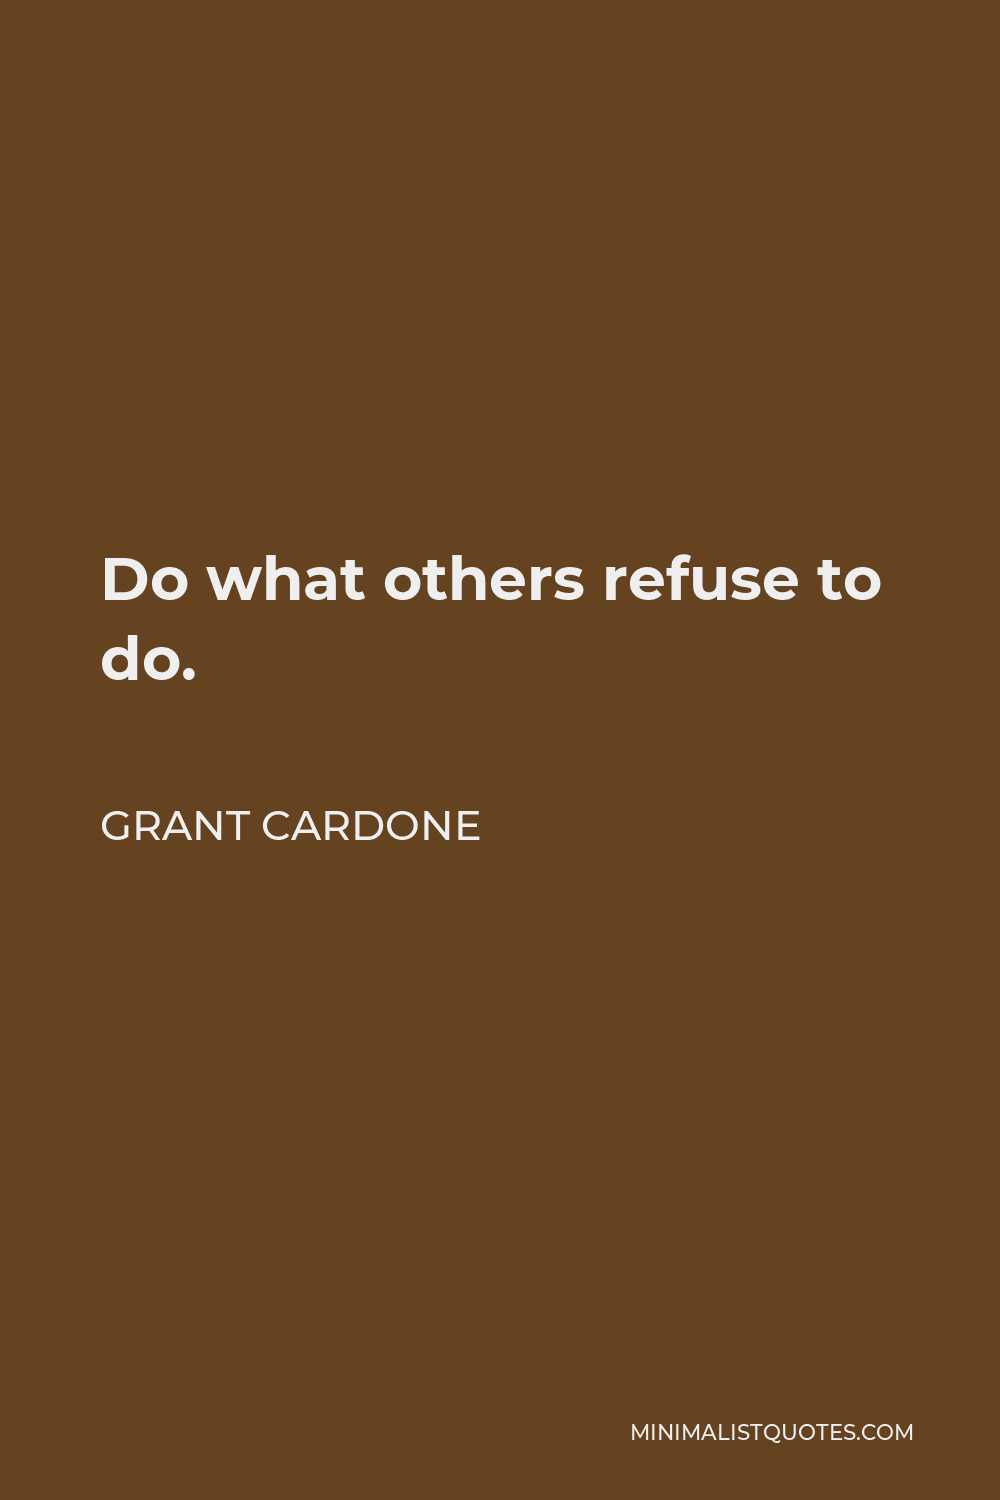 Grant Cardone Quote - Do what others refuse to do.